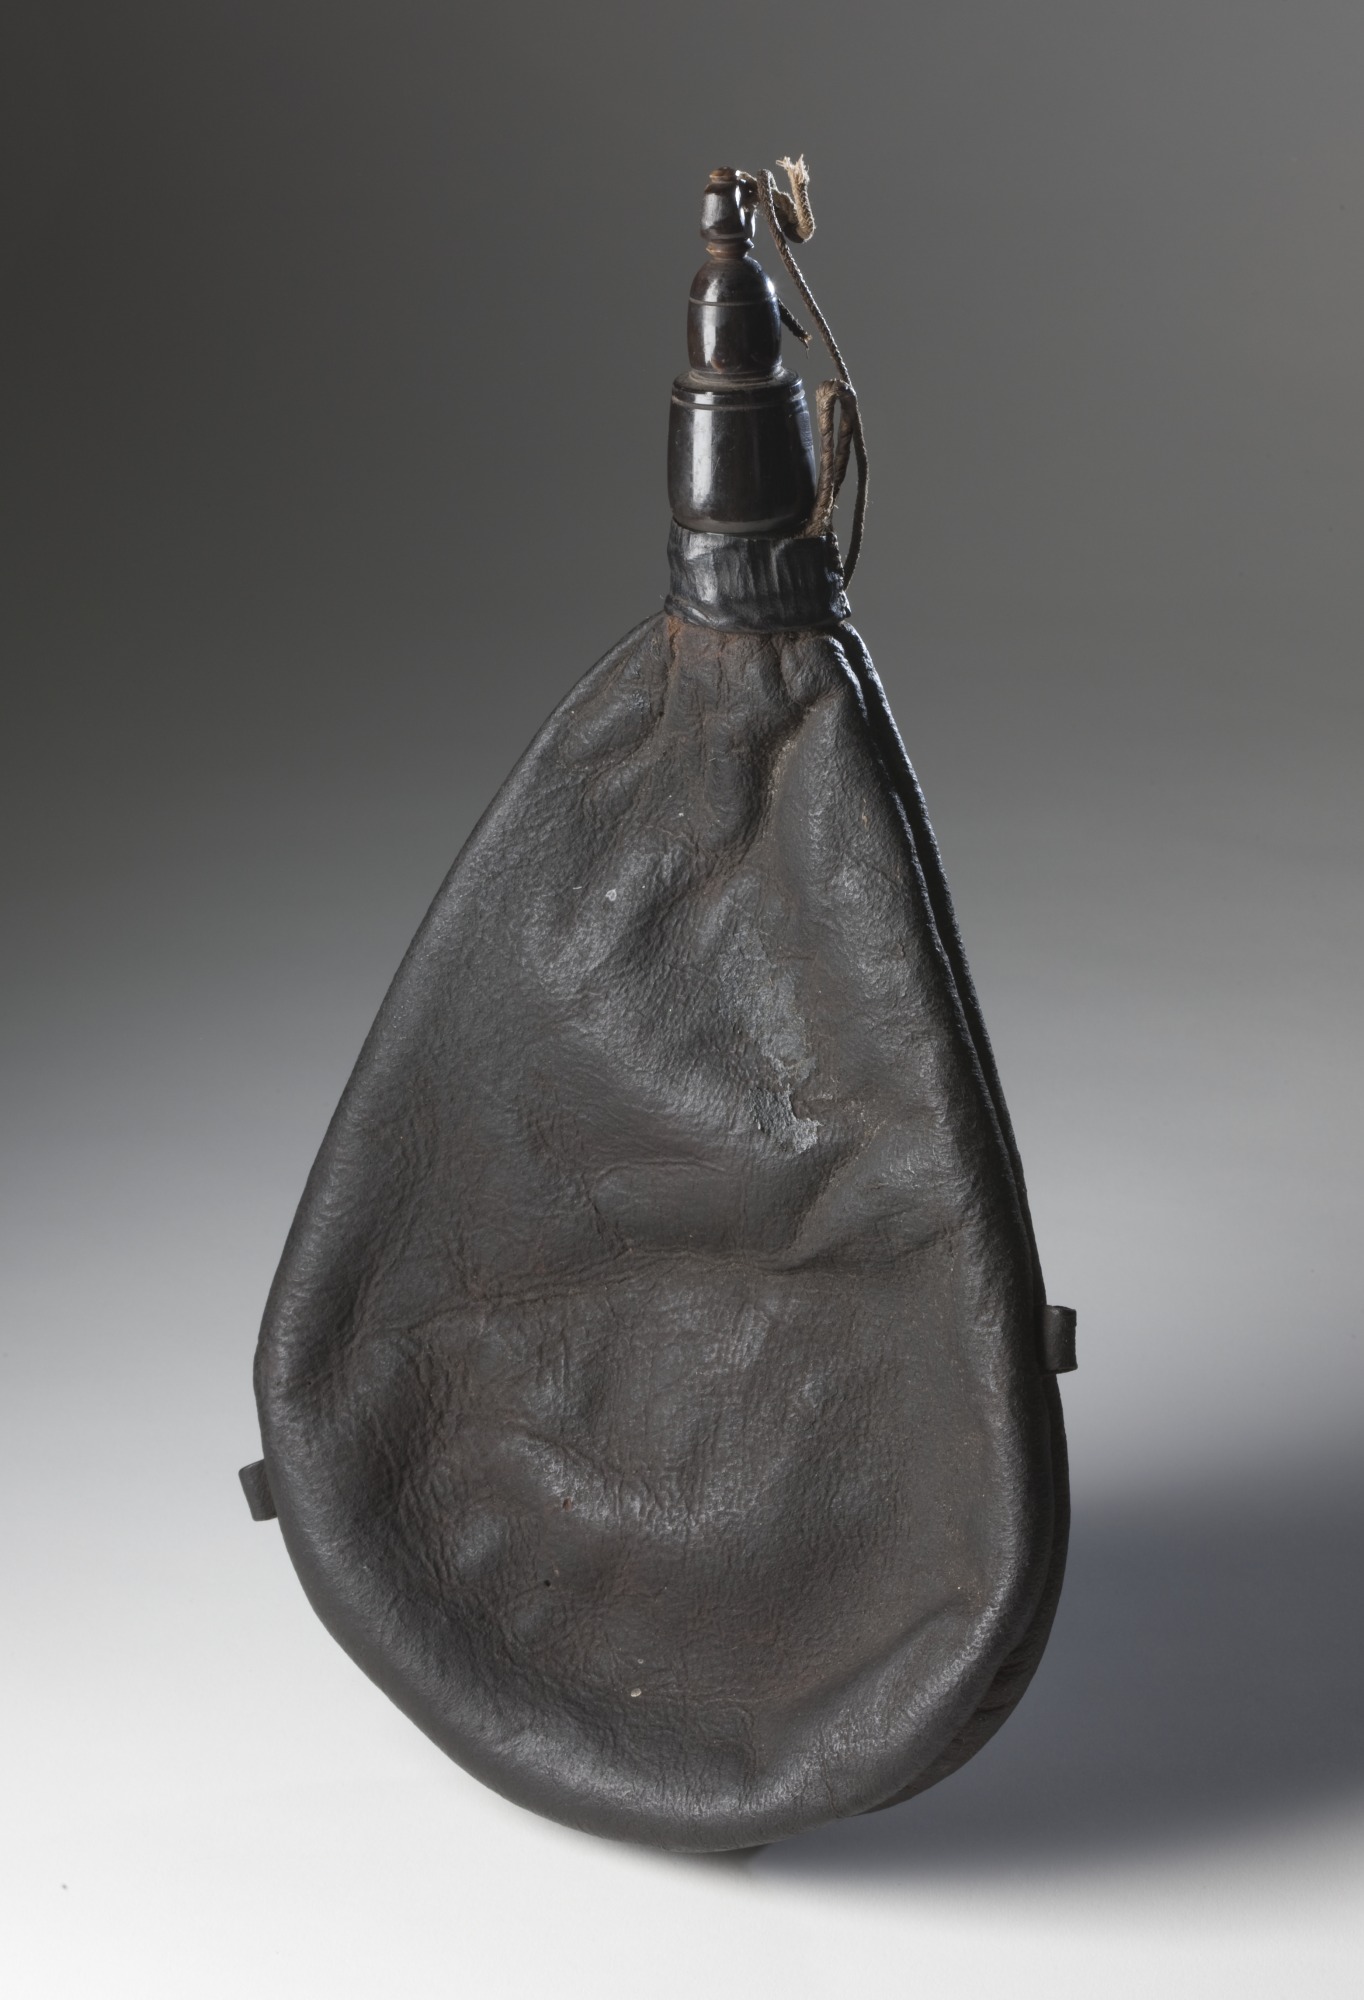 Water bottle used by explorer Robert O'Hara Burke on his 1860-1861 expedition to the Gulf of Carpentaria.